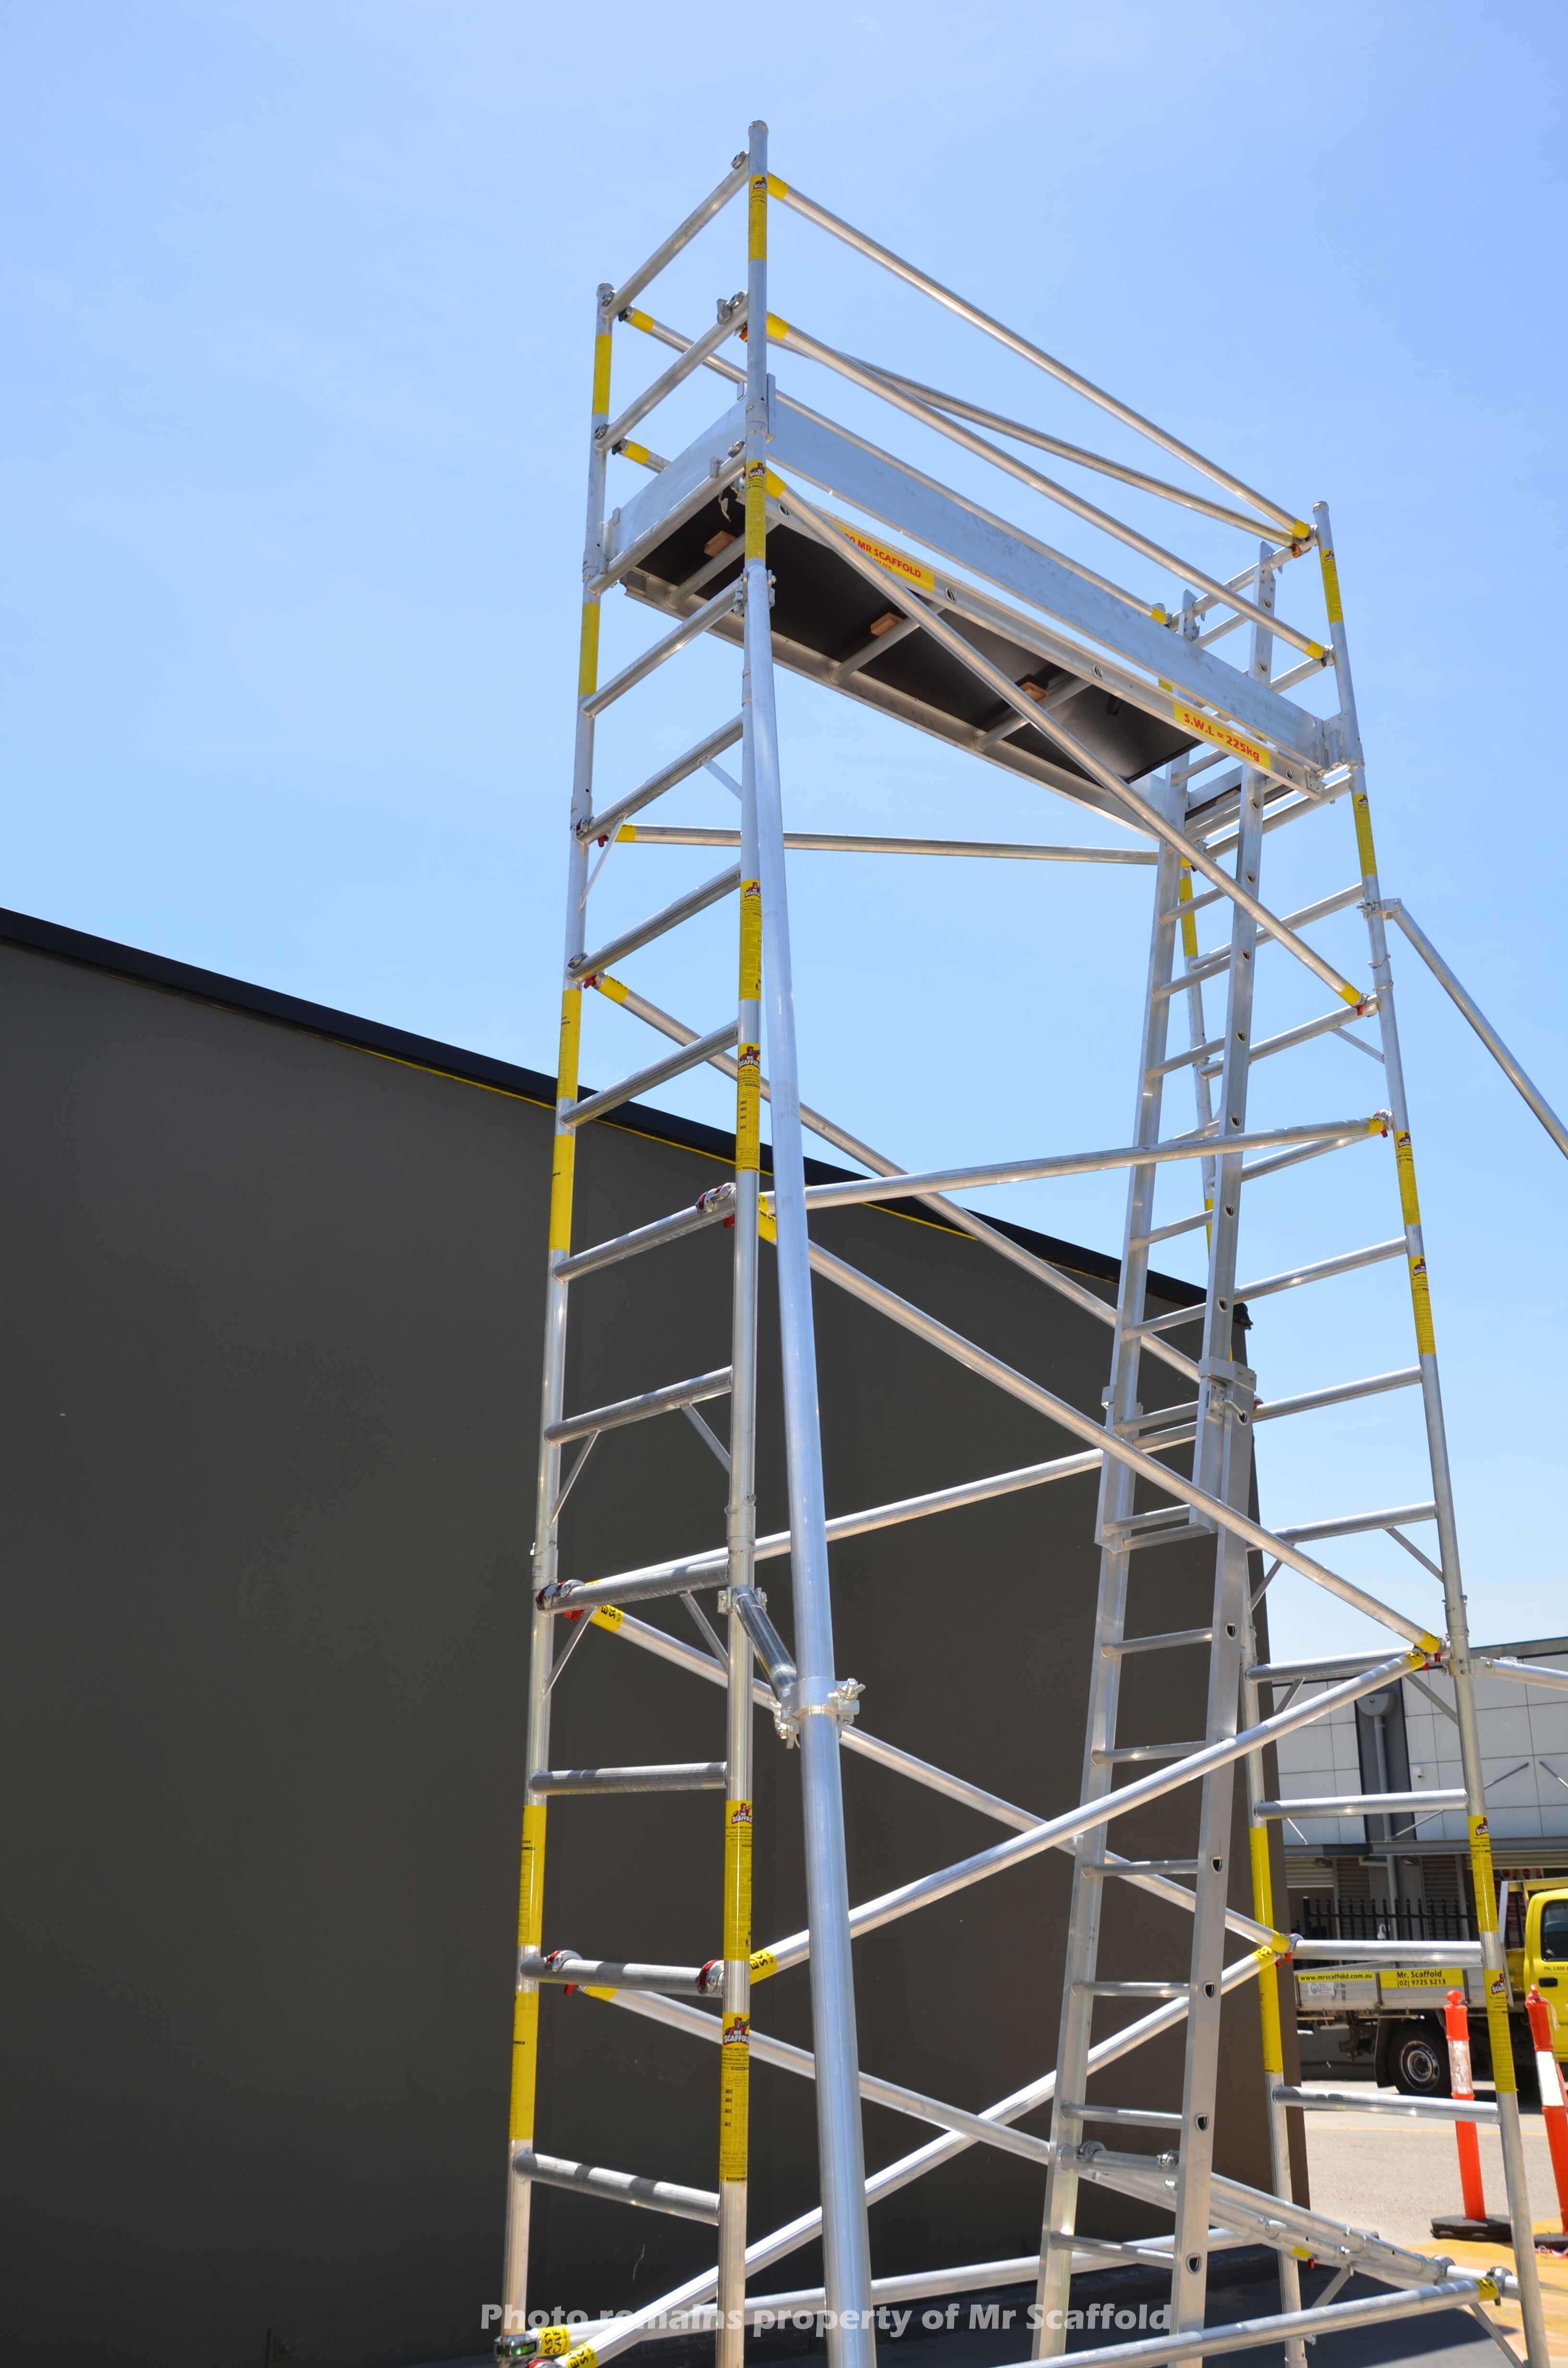 5 metre tower with outriggers deployed